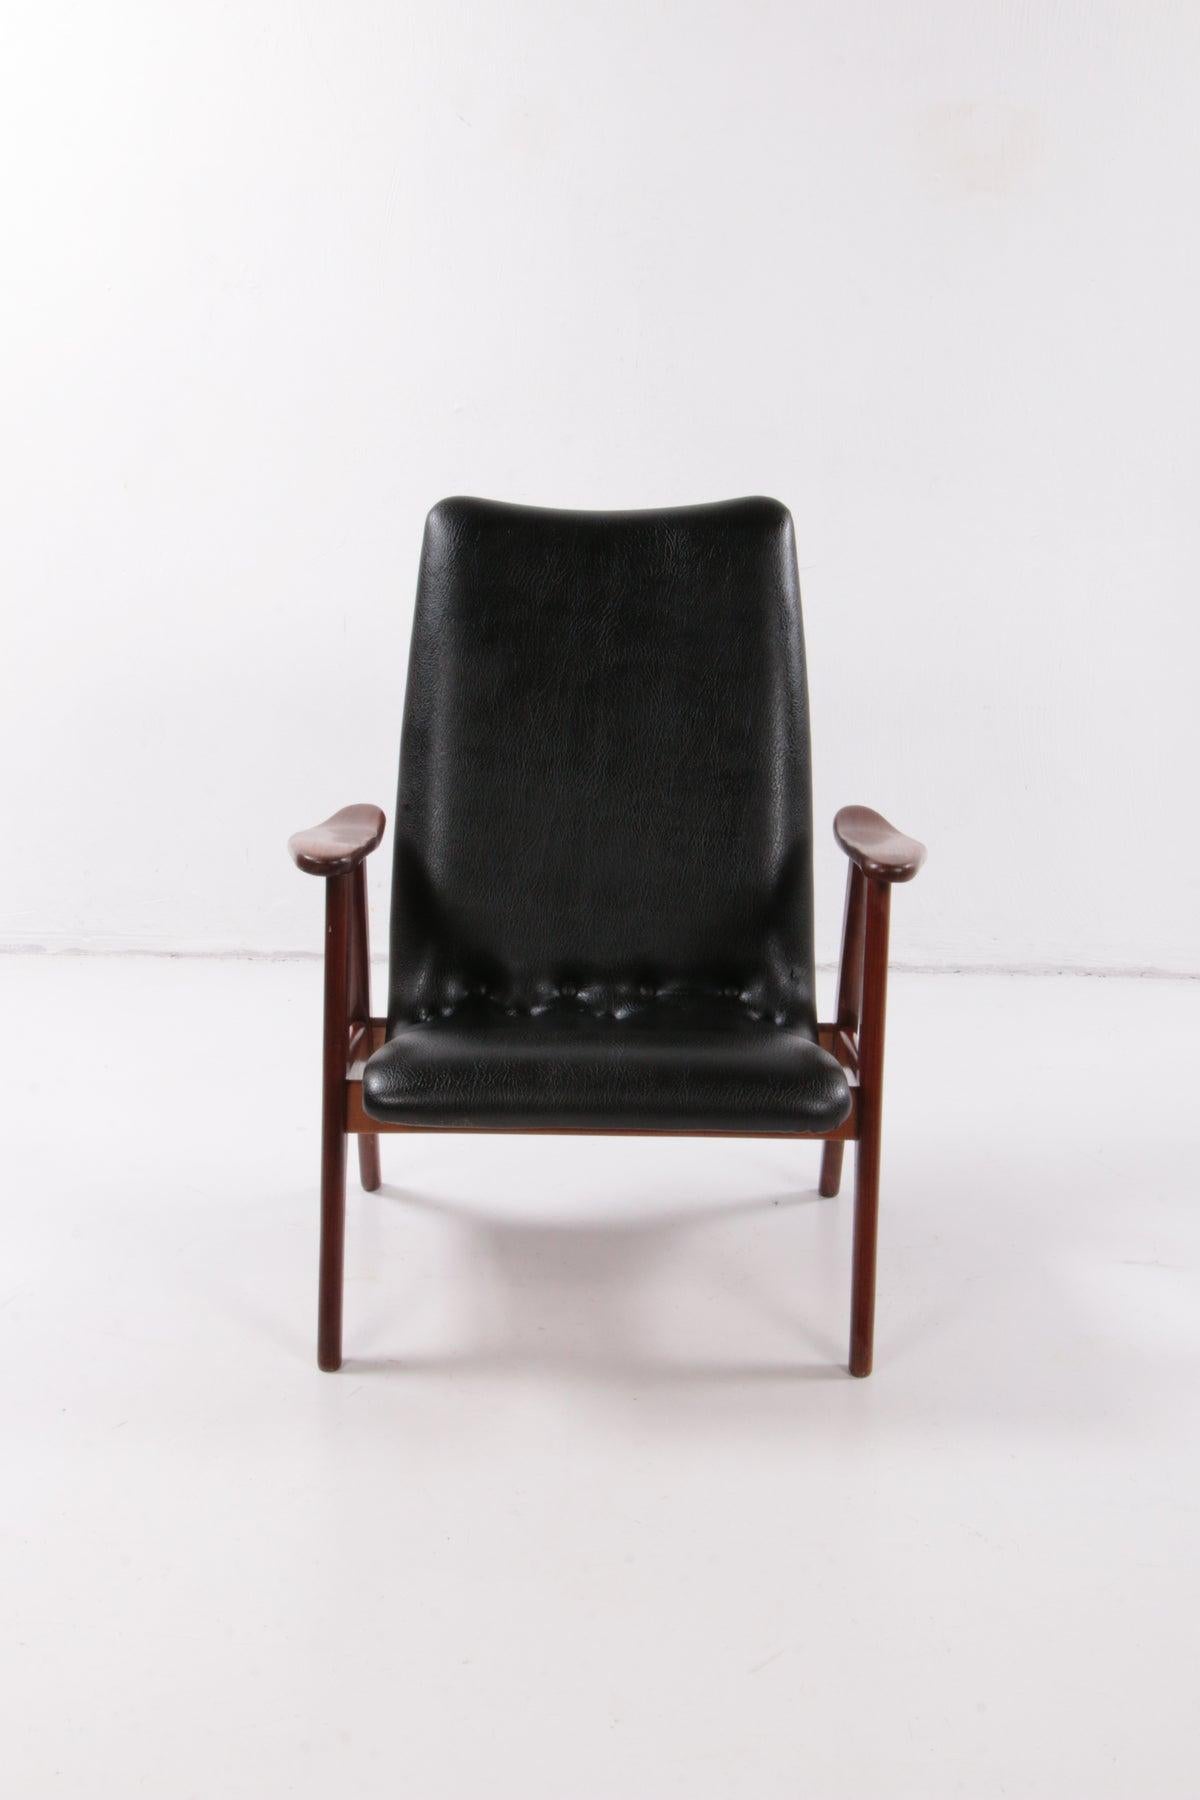 Louis Van Teeffelen Armchair Black Skai Leather for Wébé

Stylish organic armchair designed by Louis van Teeffelen for Wébé, 1960s.

Armchair made of Afromosia wood, covered with the original color and skai, which is really from that time. 
The